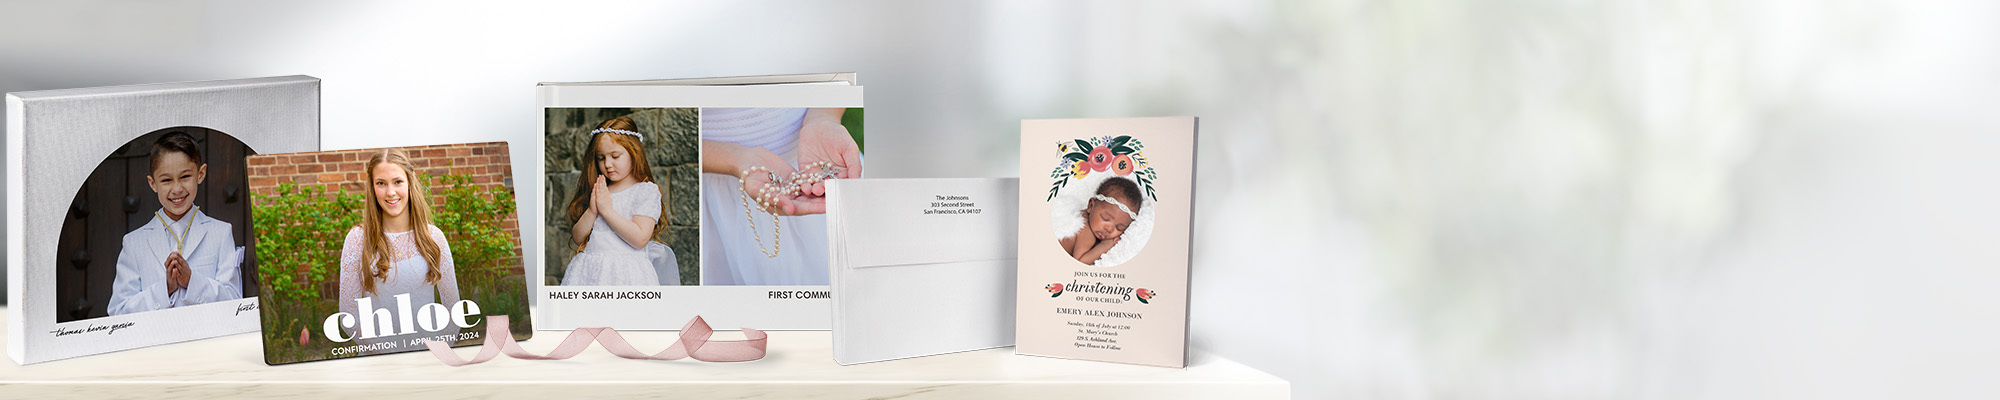 Religious Celebration Cards + Gifts